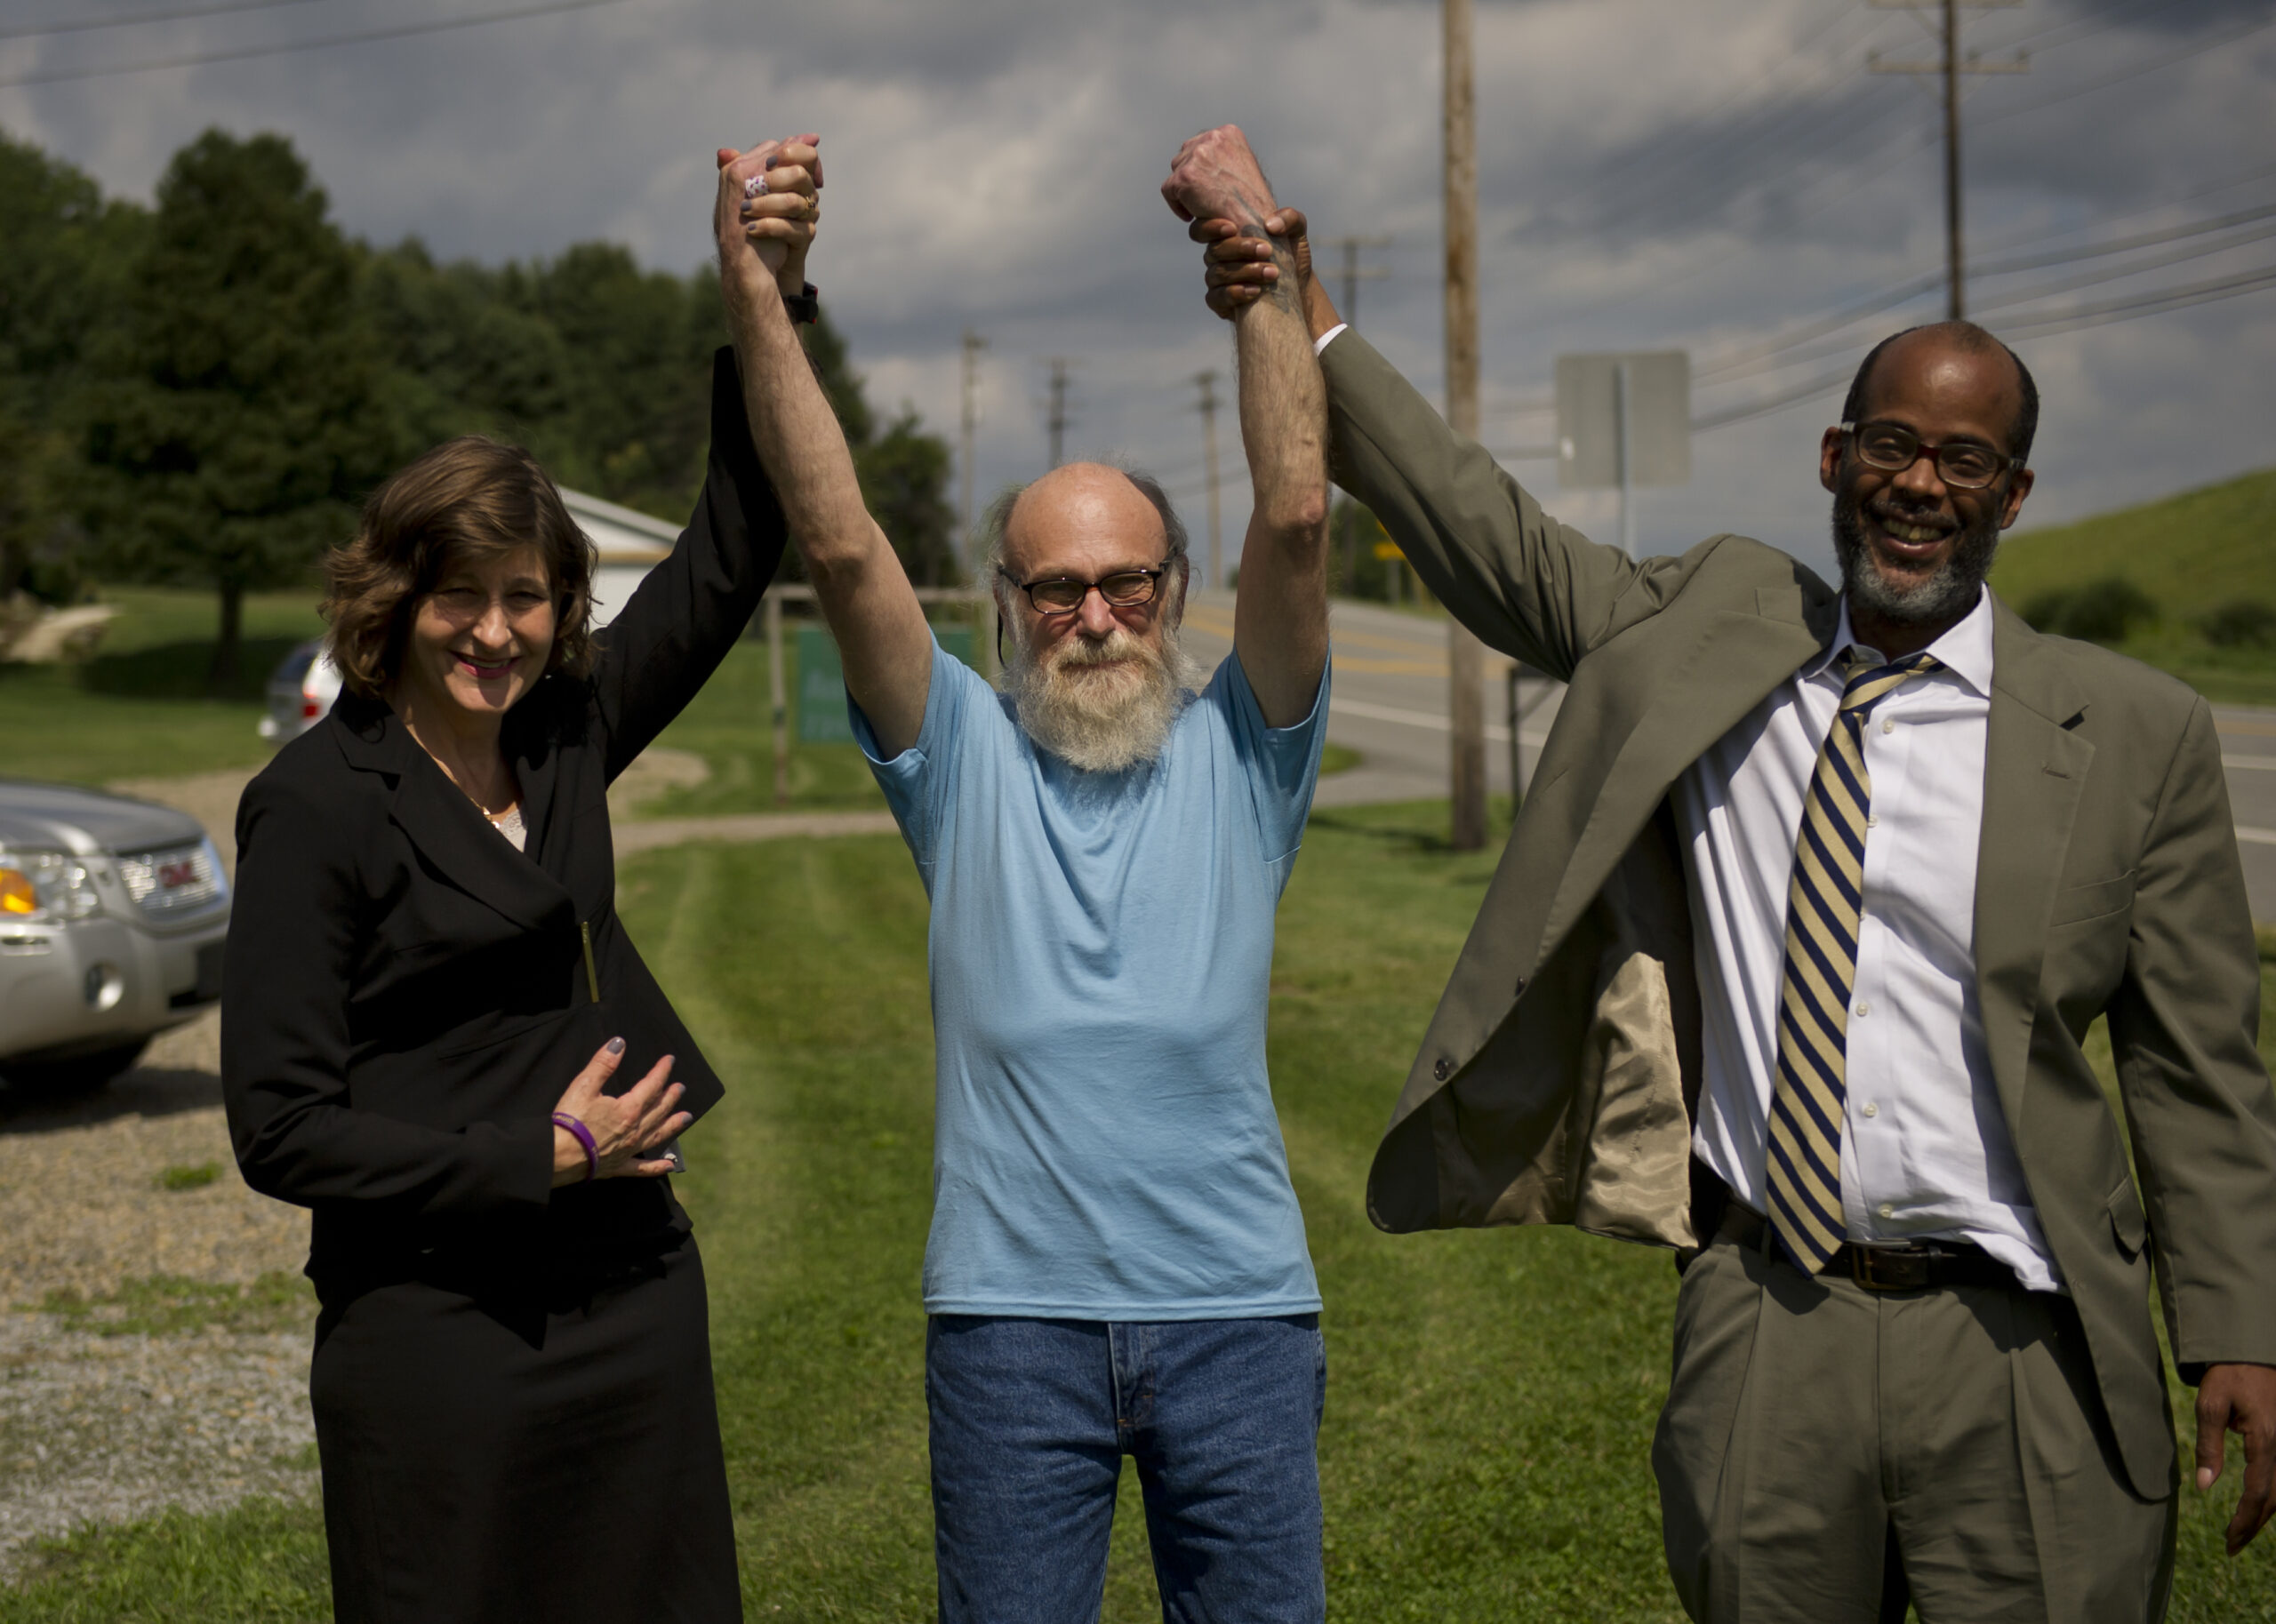 Lewis Fogle Inspires with the Story of His Wrongful Conviction and Exoneration